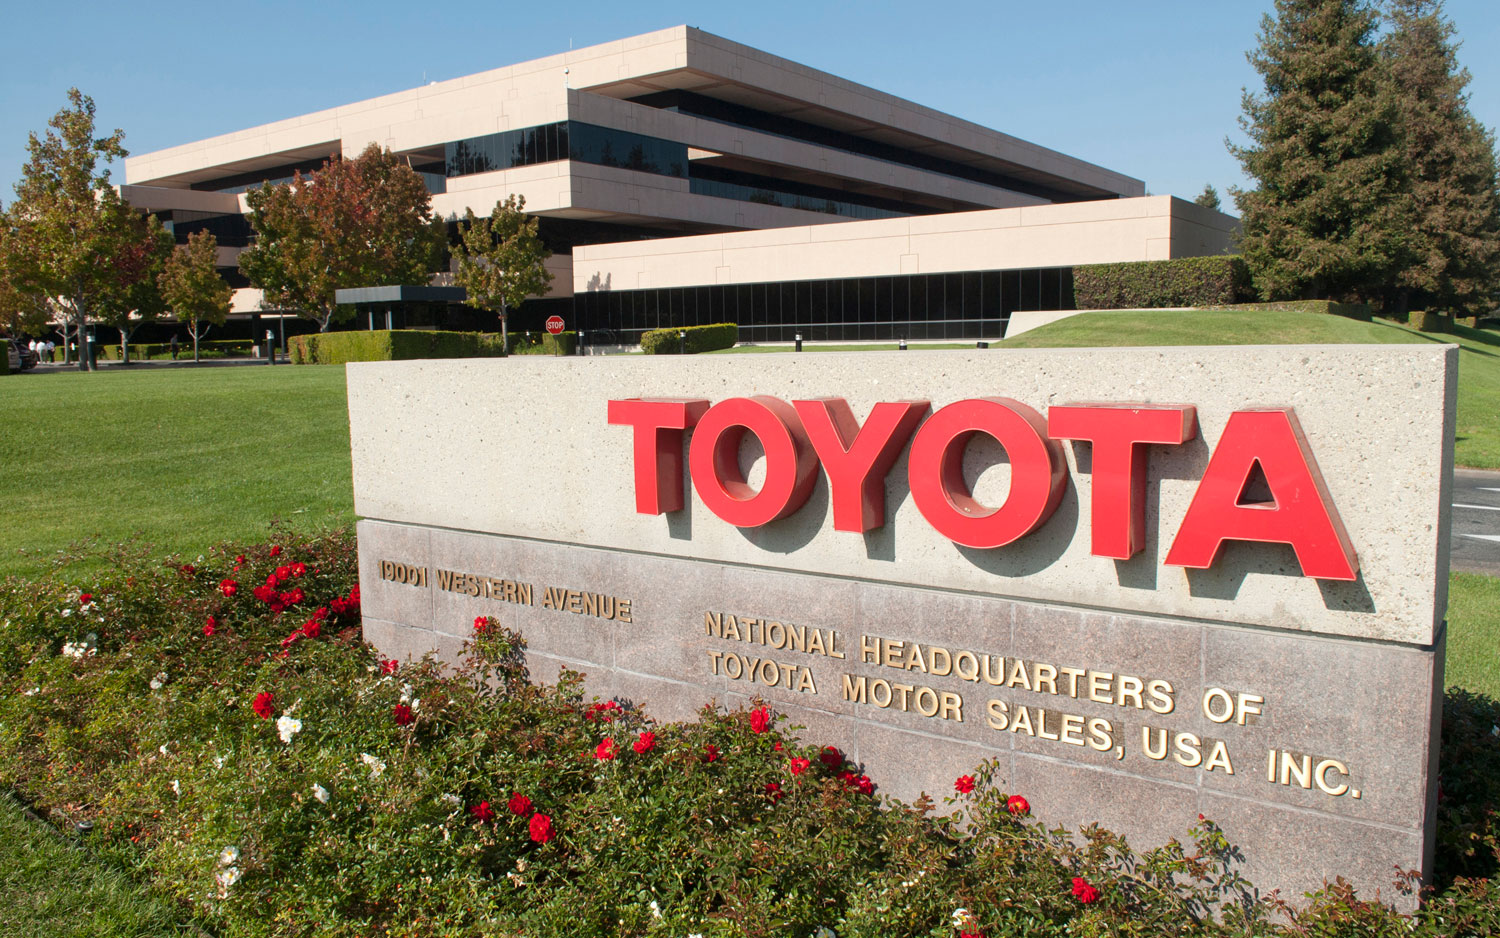 Toyota headquarter address and customer service contact details